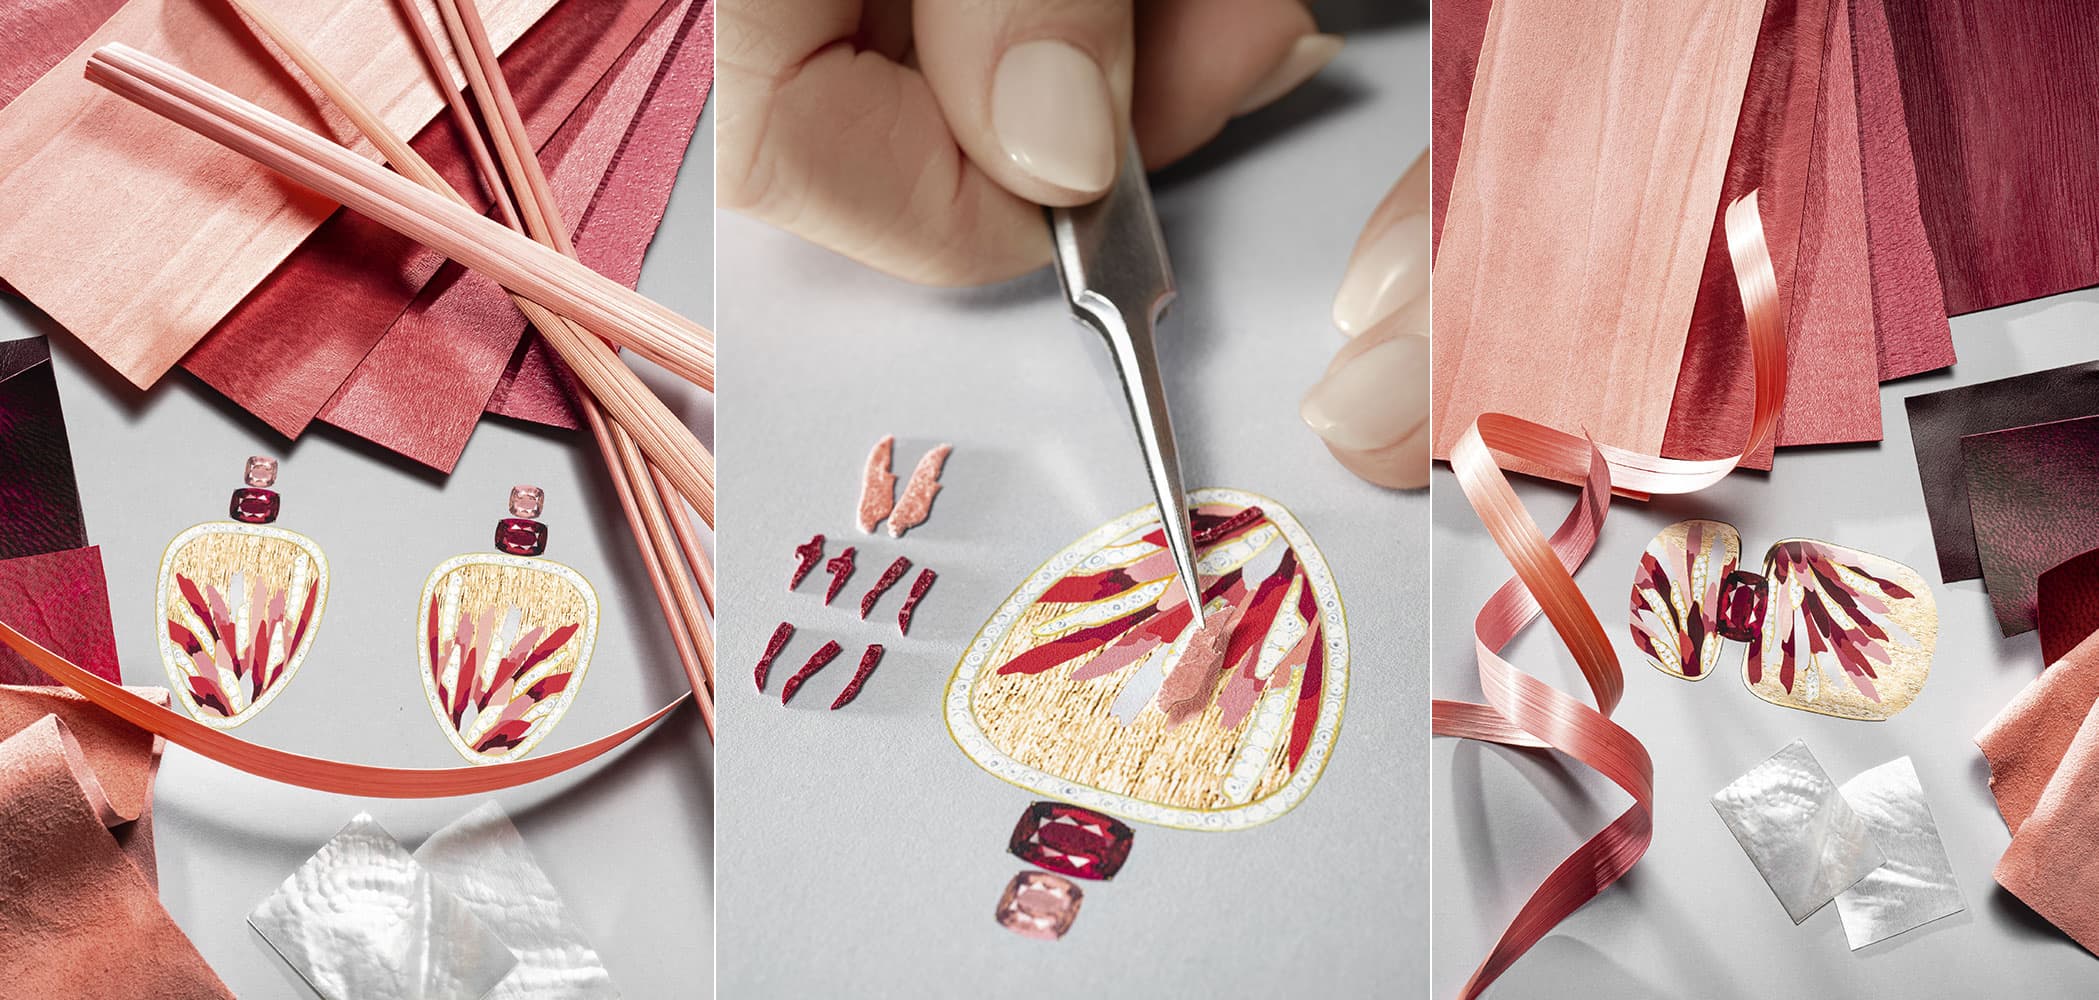 The creative process behind the Piaget Rainbow Lights earrings from the Wings of Light High Jewellery Collection, featuring rubellites, pink tourmalines, diamonds, wood, leather and mother of pearl marquetry, created by Maître d’Art, Rose Saneuil